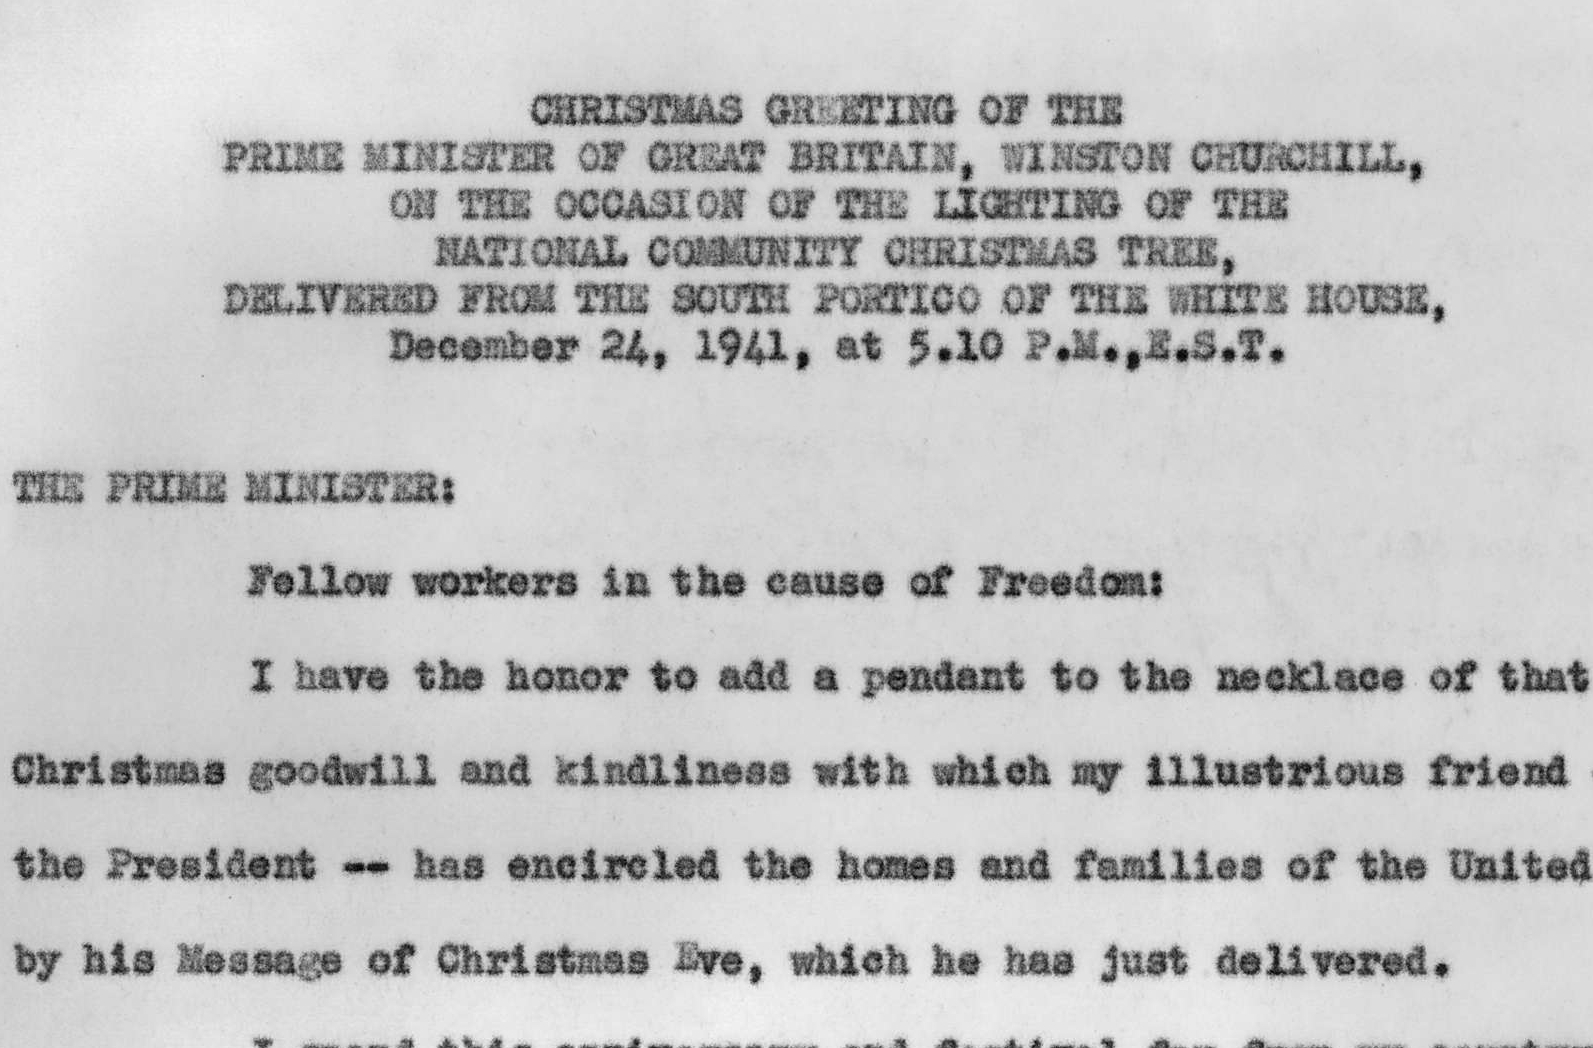 Franklin D. Roosevelt and Winston Churchill Christmas eve greeting from the White House in Washington, D.C.